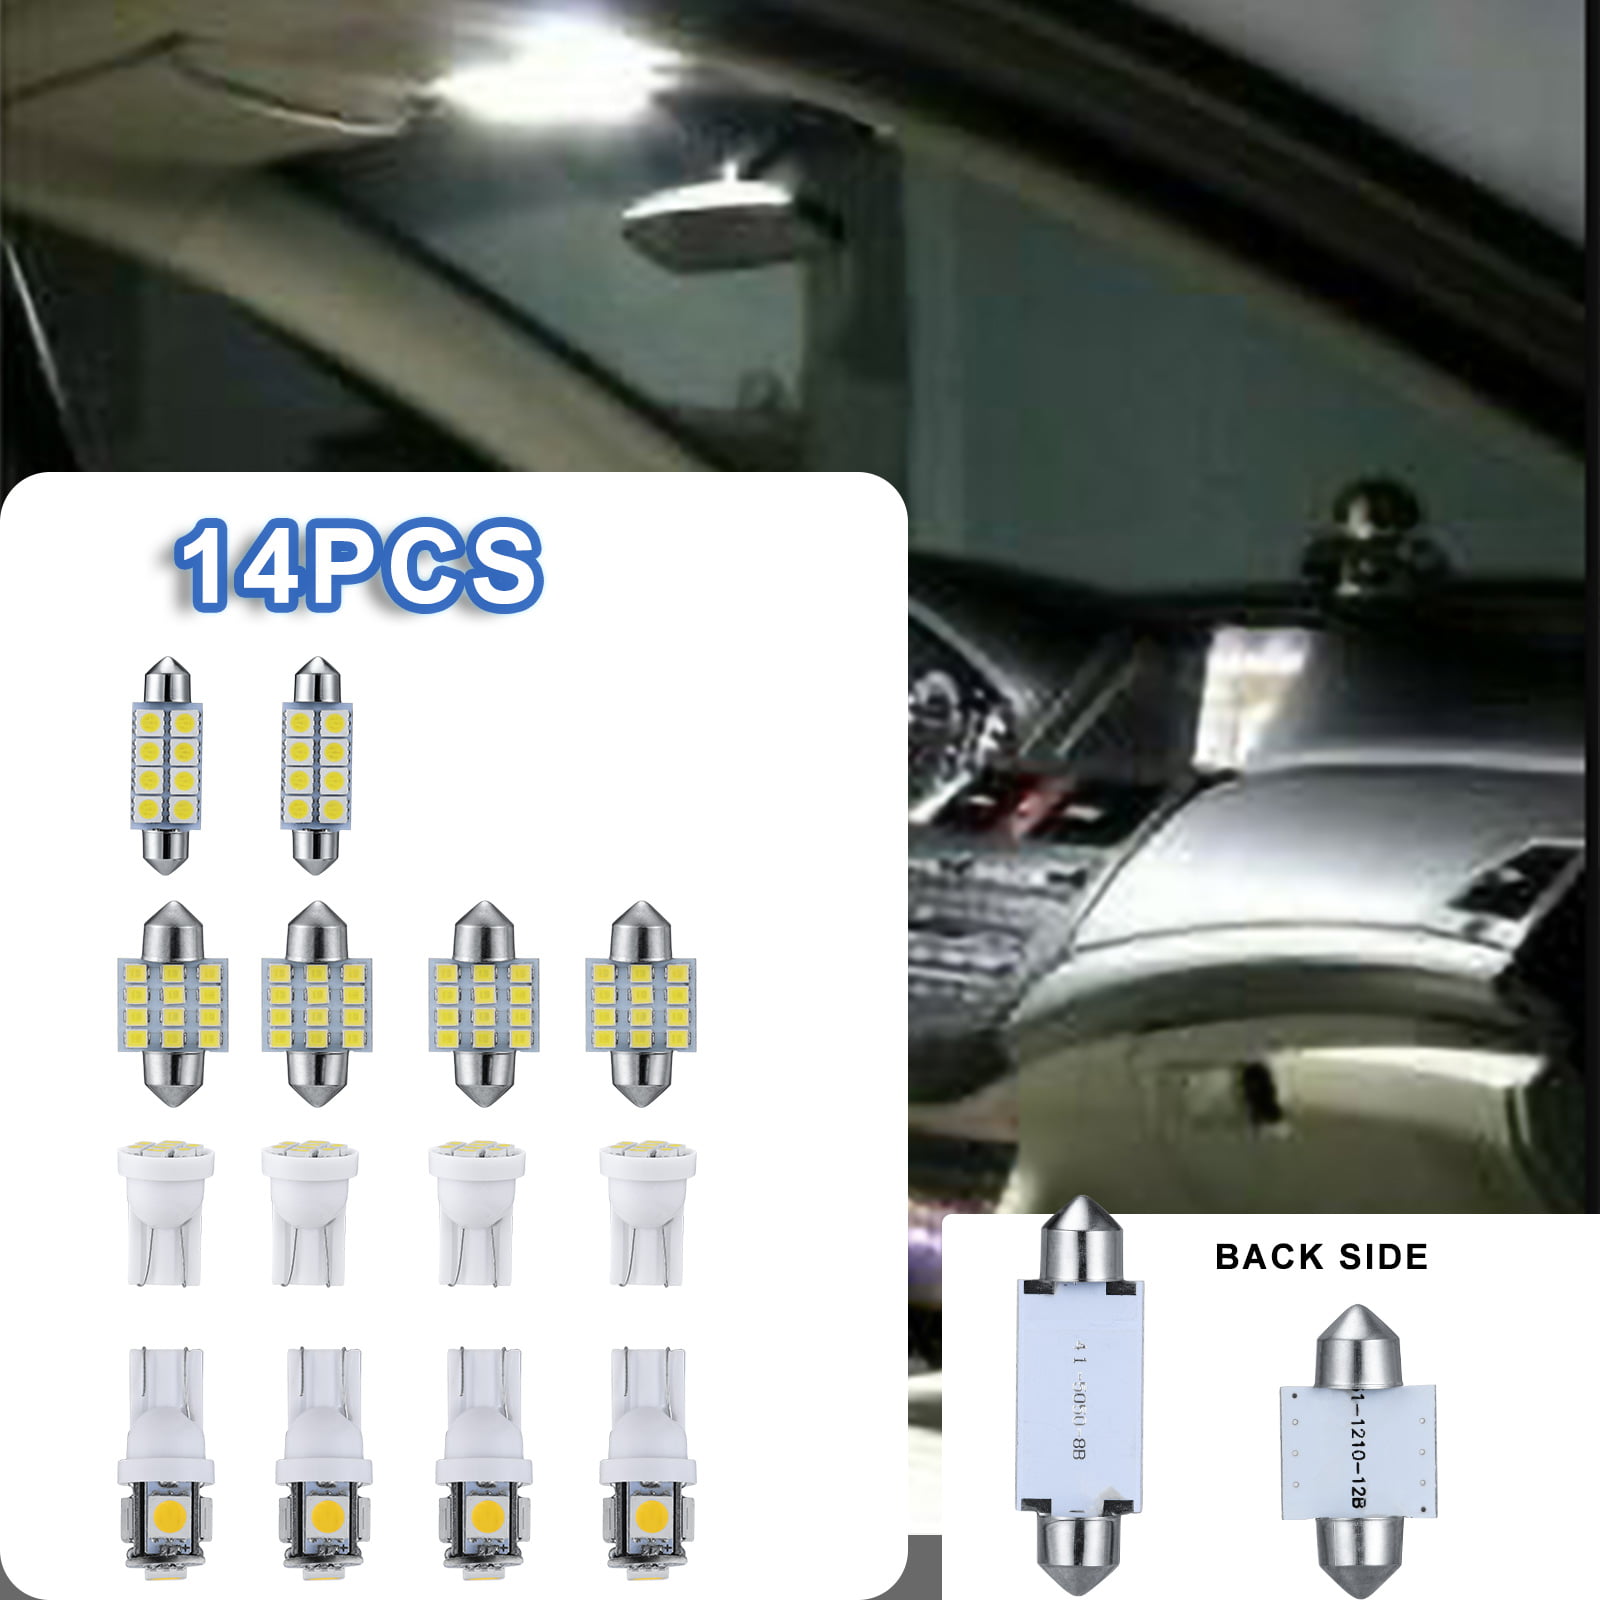 14Pcs Car White LED Lights Kit for Stock Interior & Dome & License Plate Lamps Y